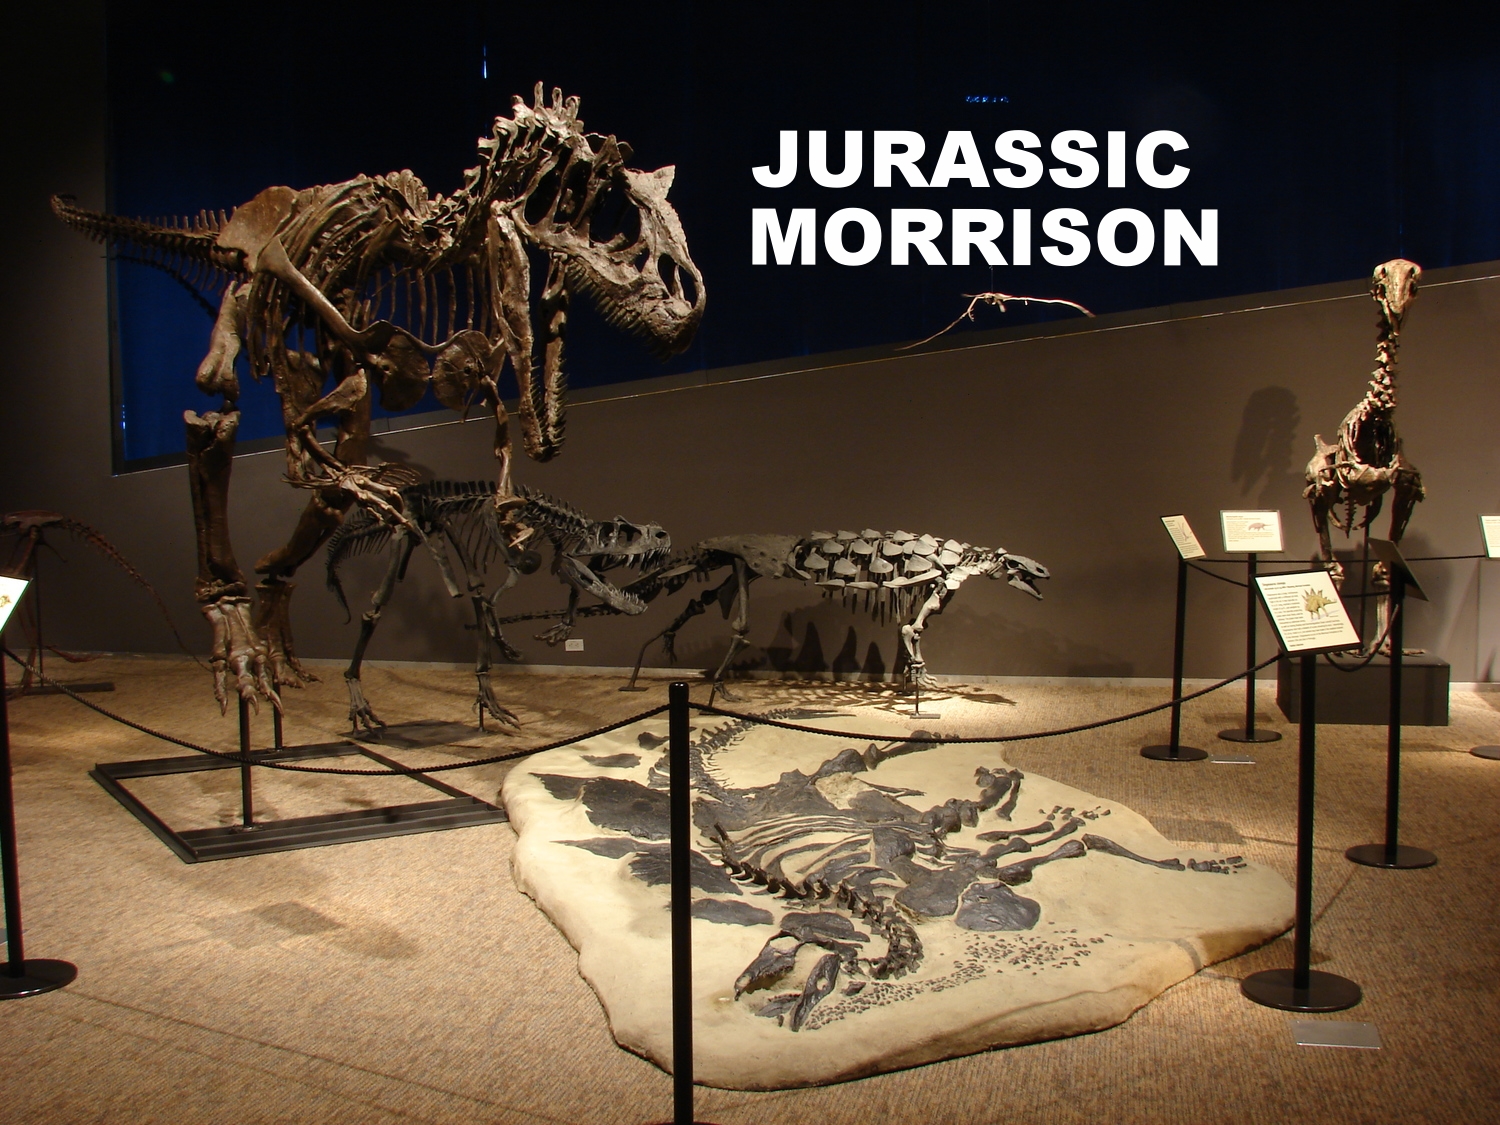 Jurassic Dinosaurs of the Morrison Formation